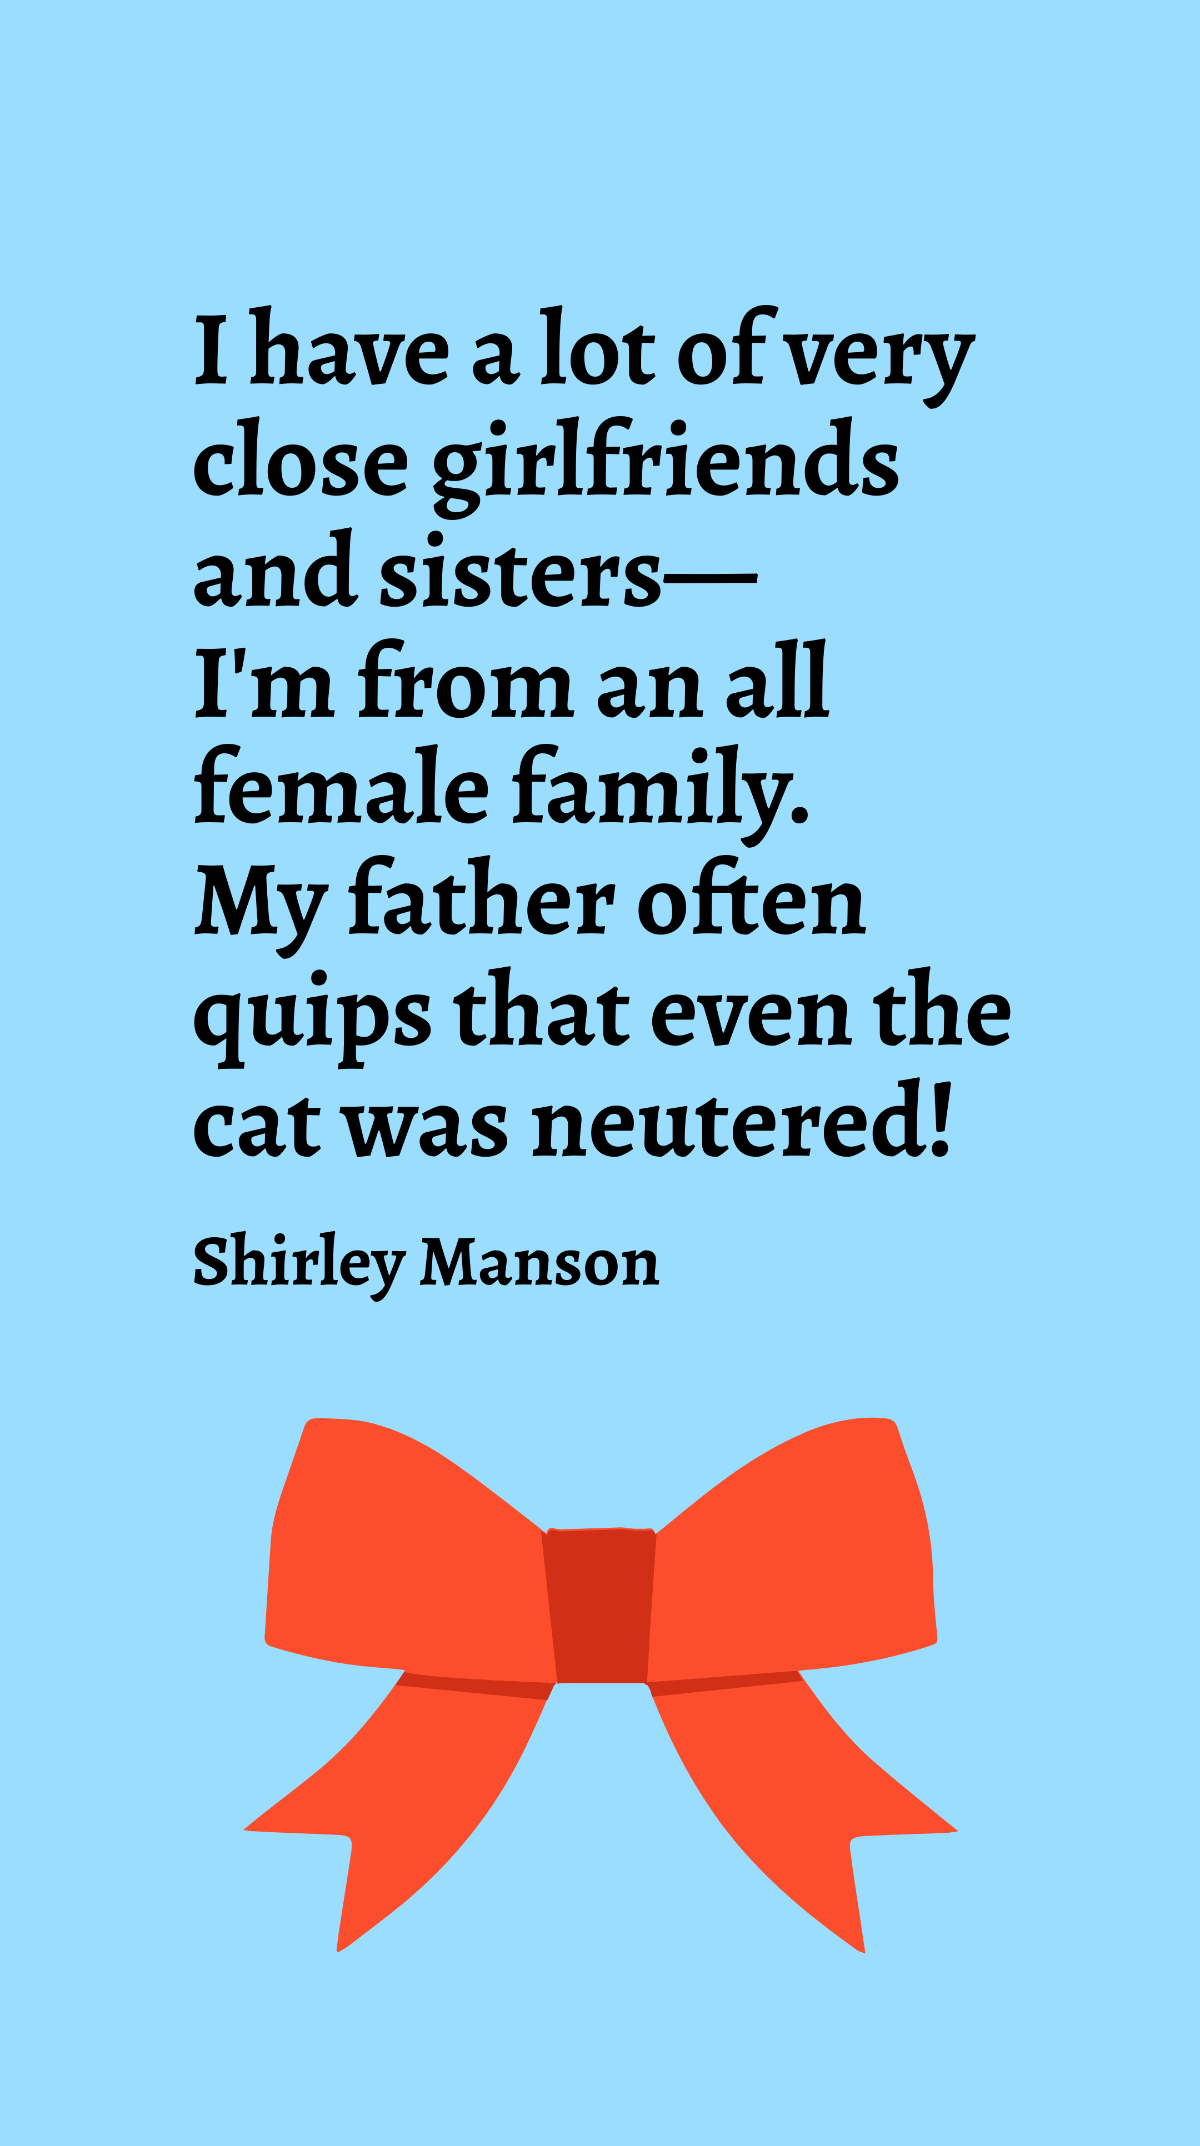 Free Shirley Manson - I have a lot of very close girlfriends and sisters - I'm from an all female family. My father often quips that even the cat was neutered! Template